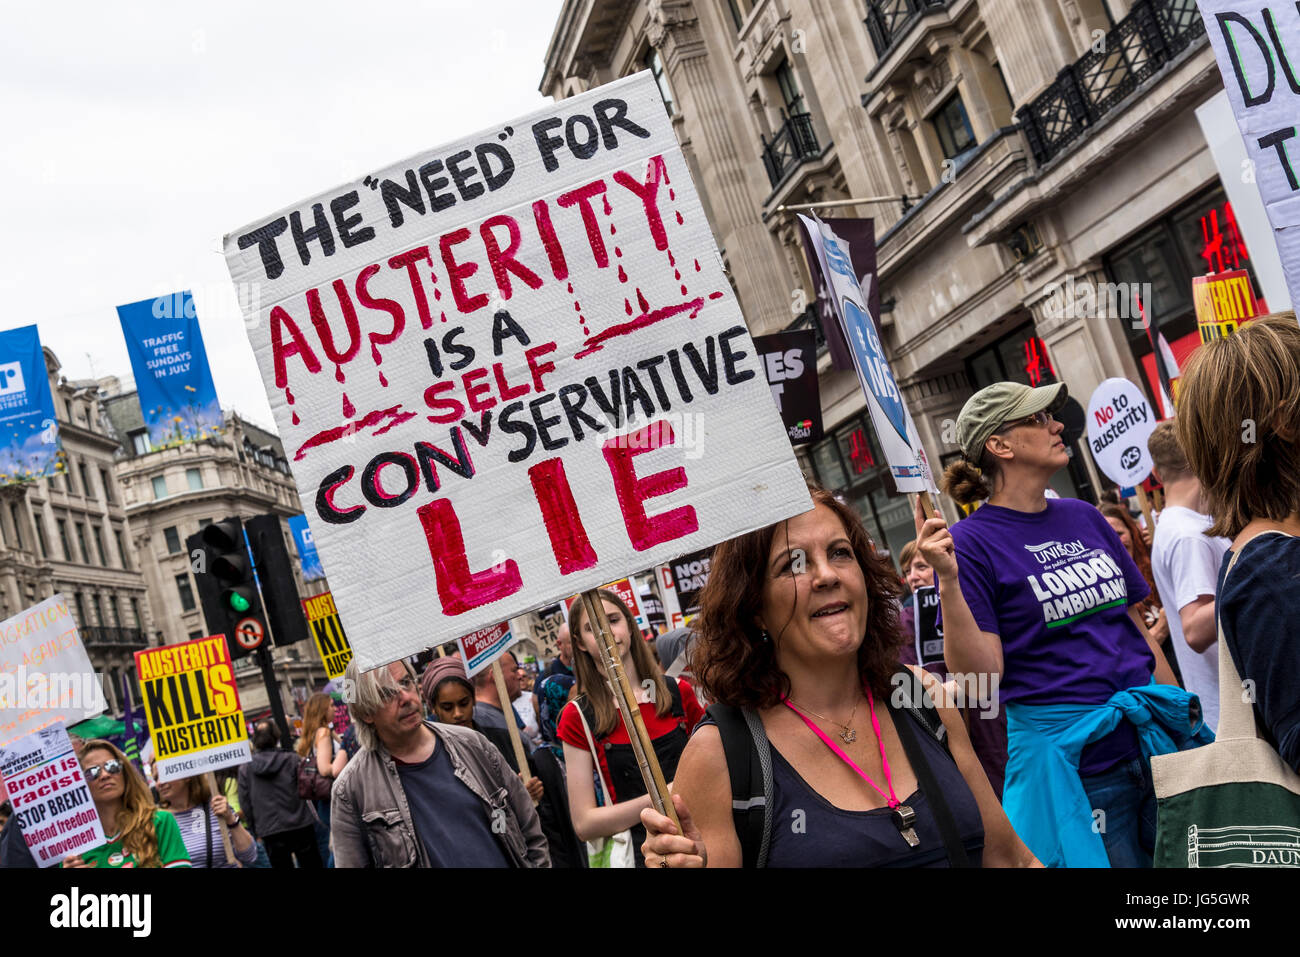 Not One Day More - Tories Out National Demonstration, an Anti-Government and Teresa May protest organised by an anti-austerity campaign group The Peop Stock Photo